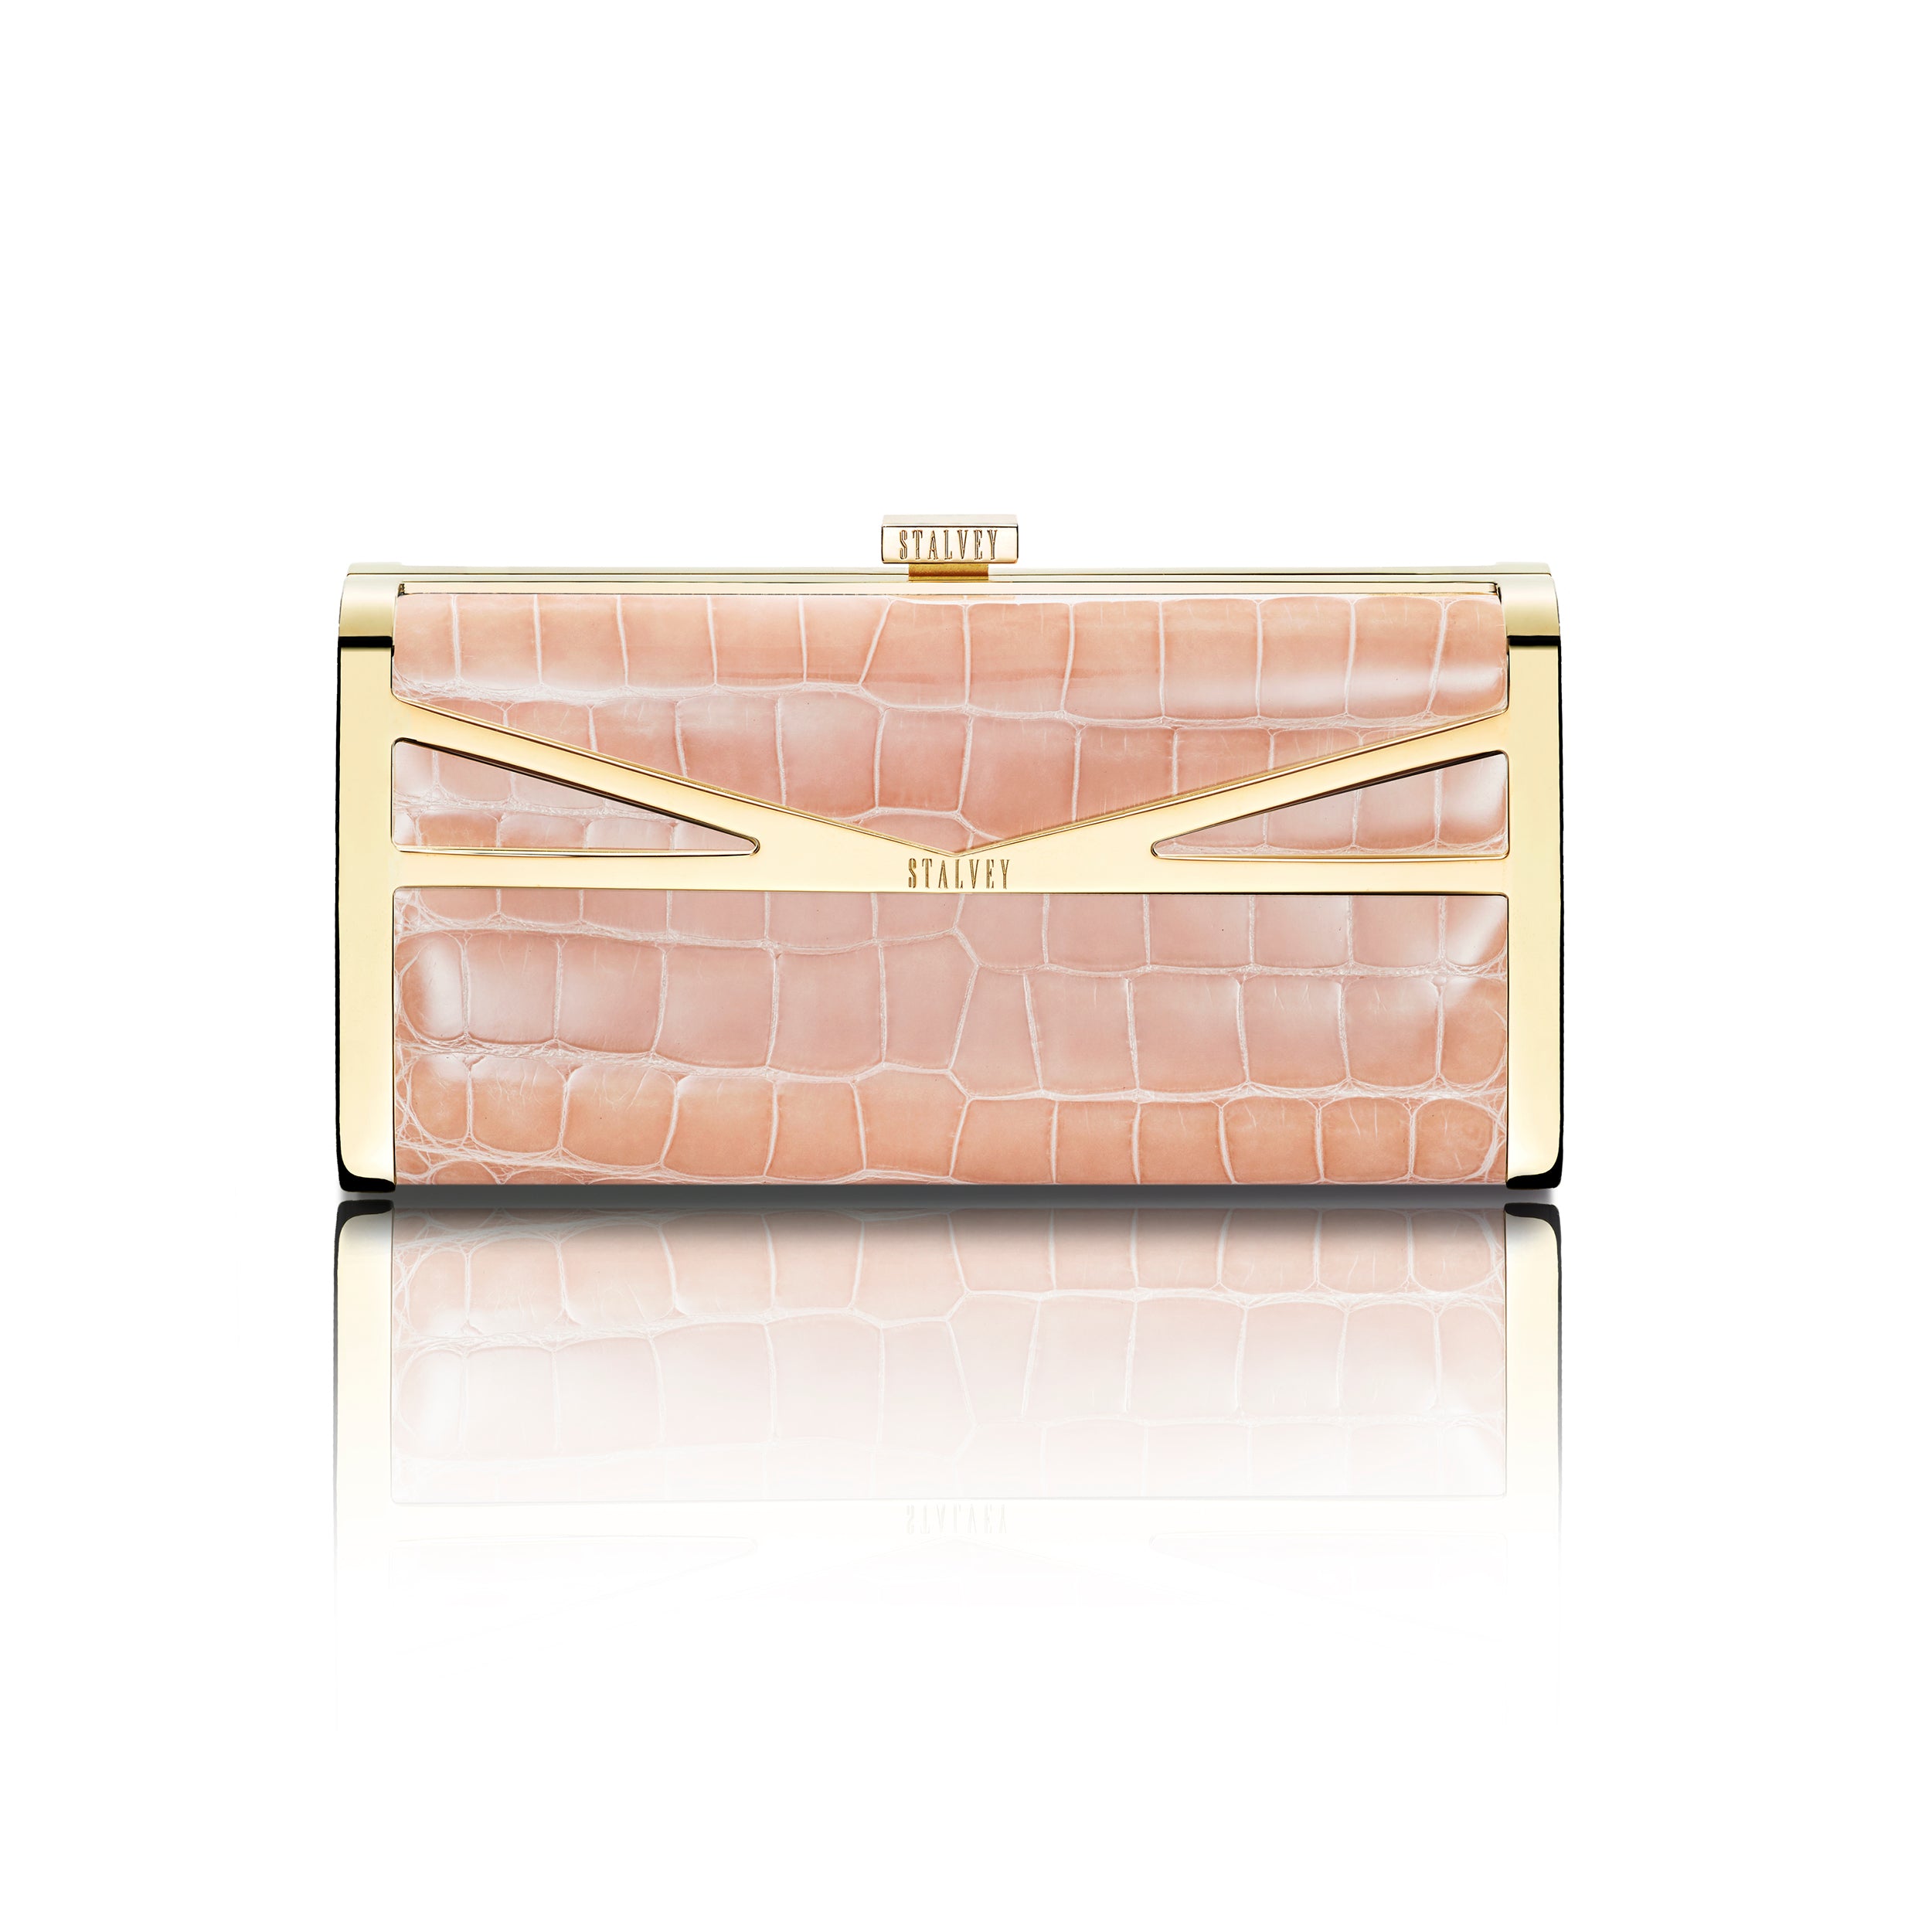 STALVEY Square Clutch in Powder Pink Alligator with 24kt Gold Hardware Front View